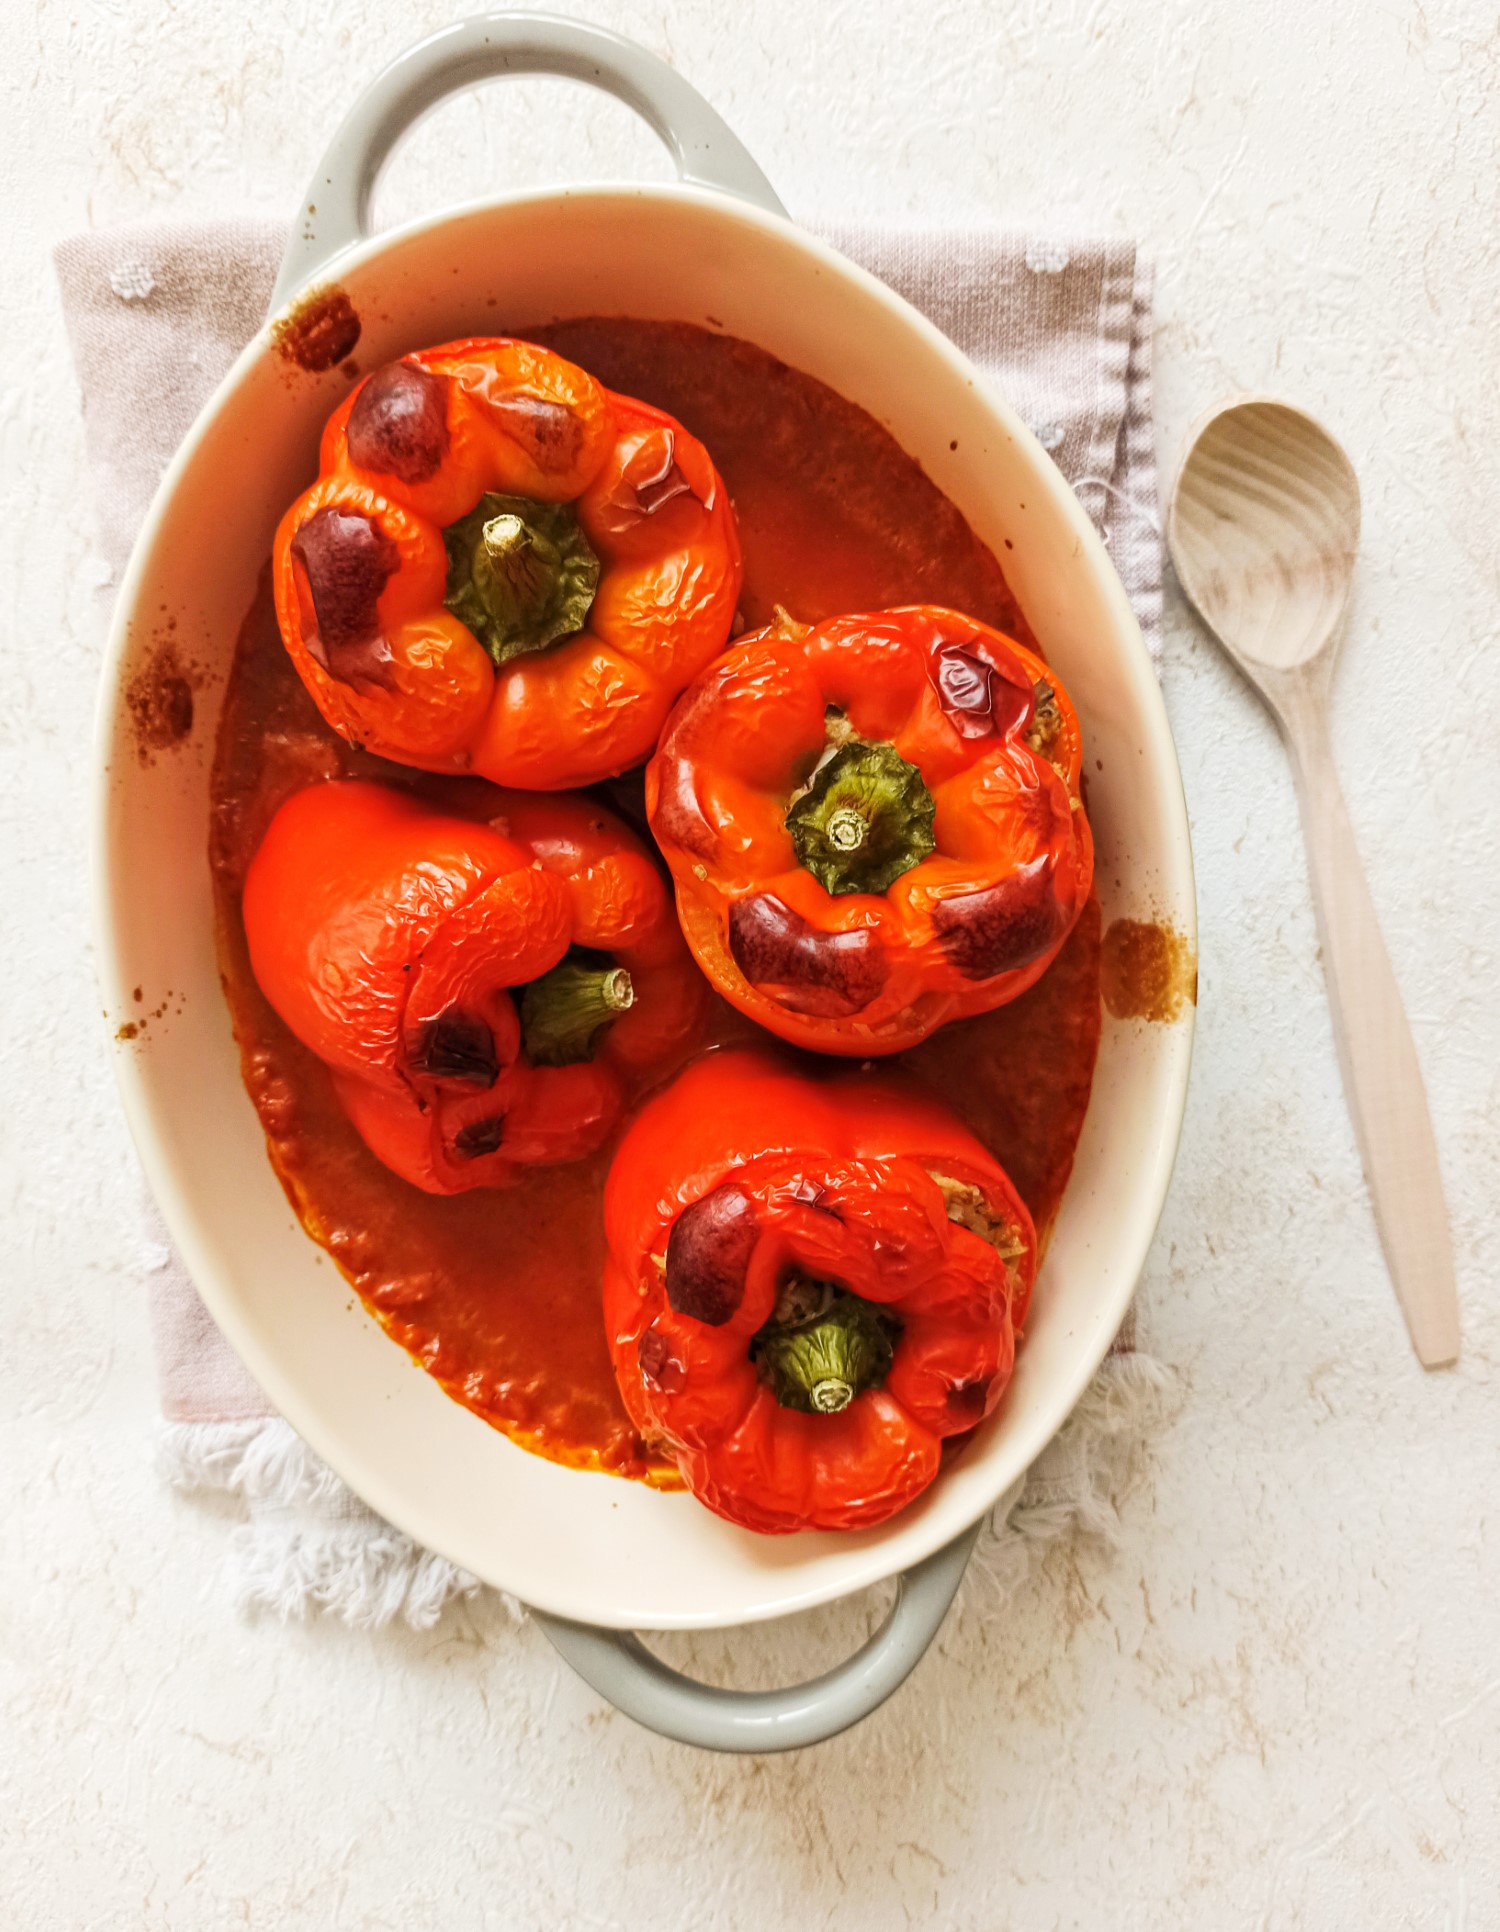 Stuffed Peppers with Vegetables - Title of the Recipe